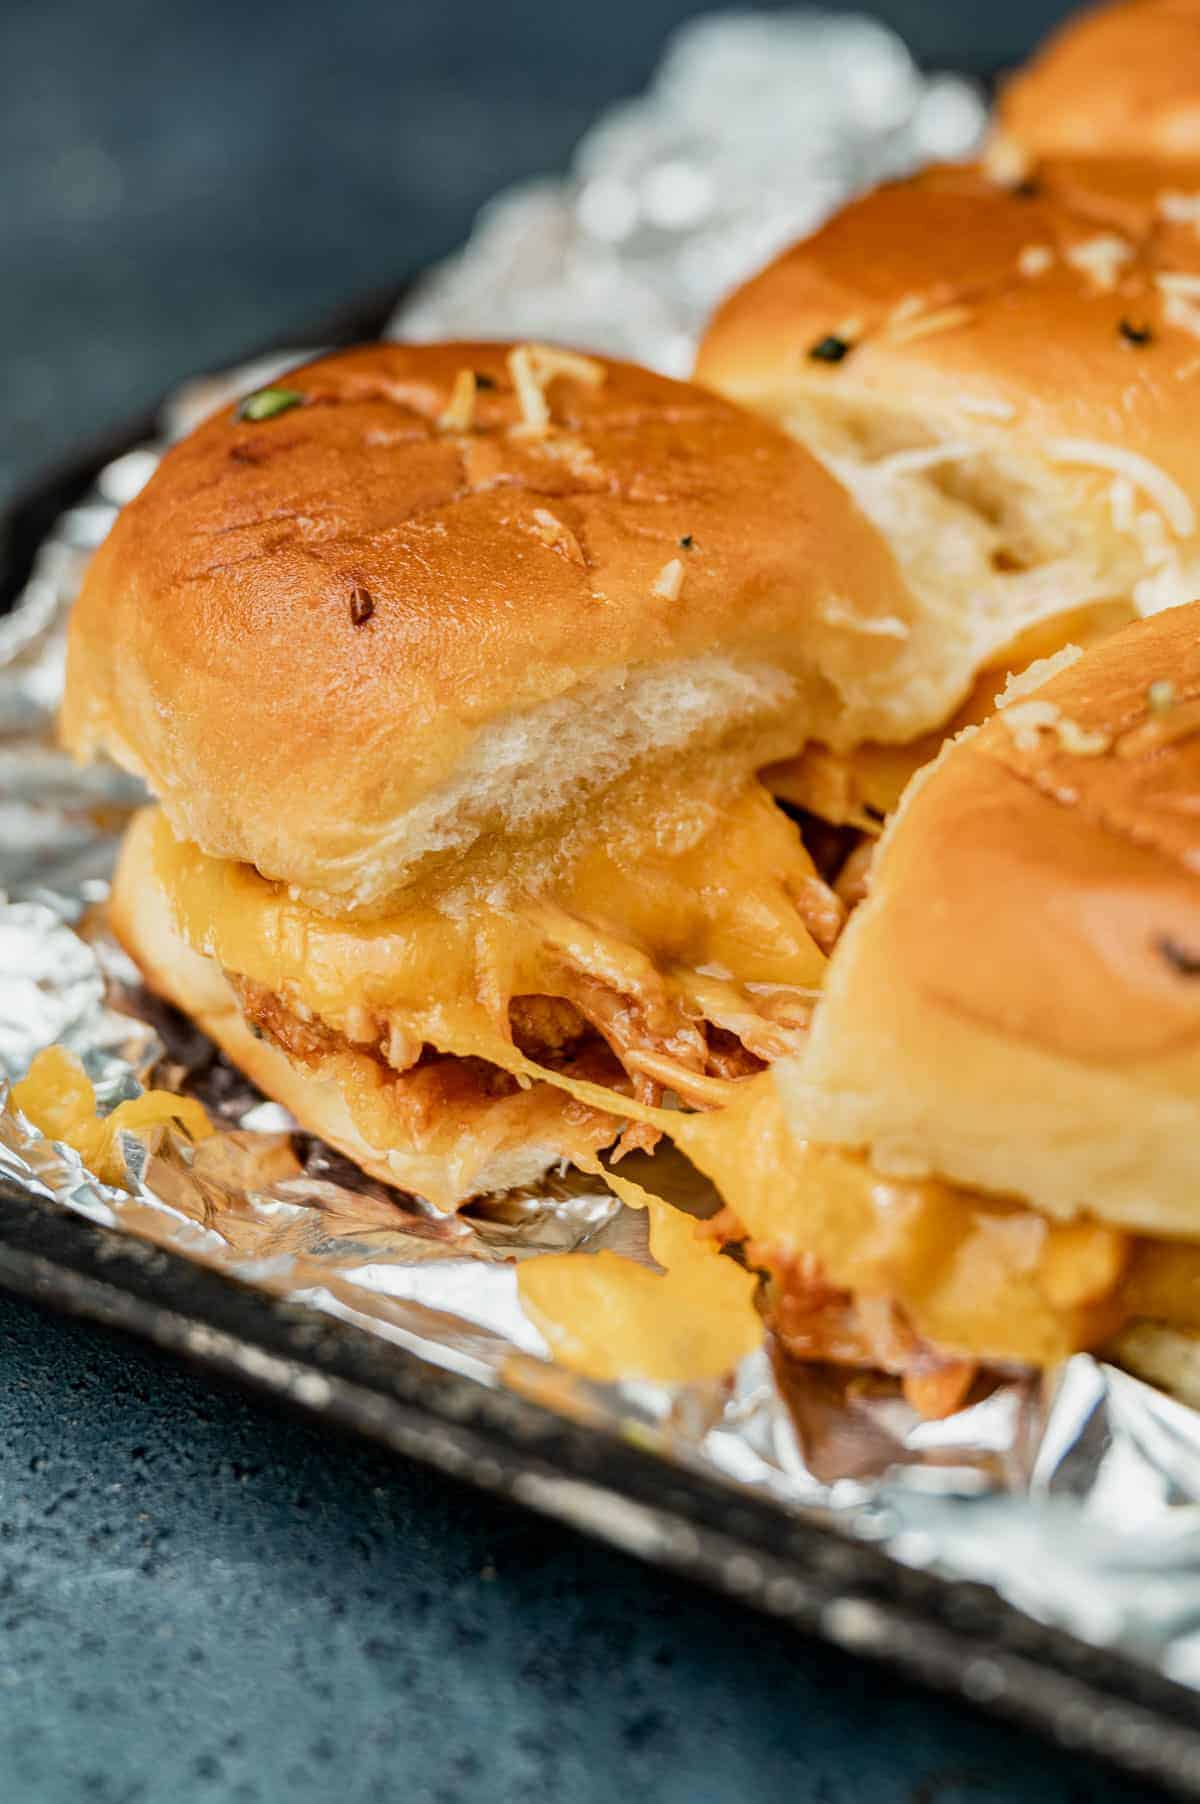 BBQ chicken sliders on a tray.